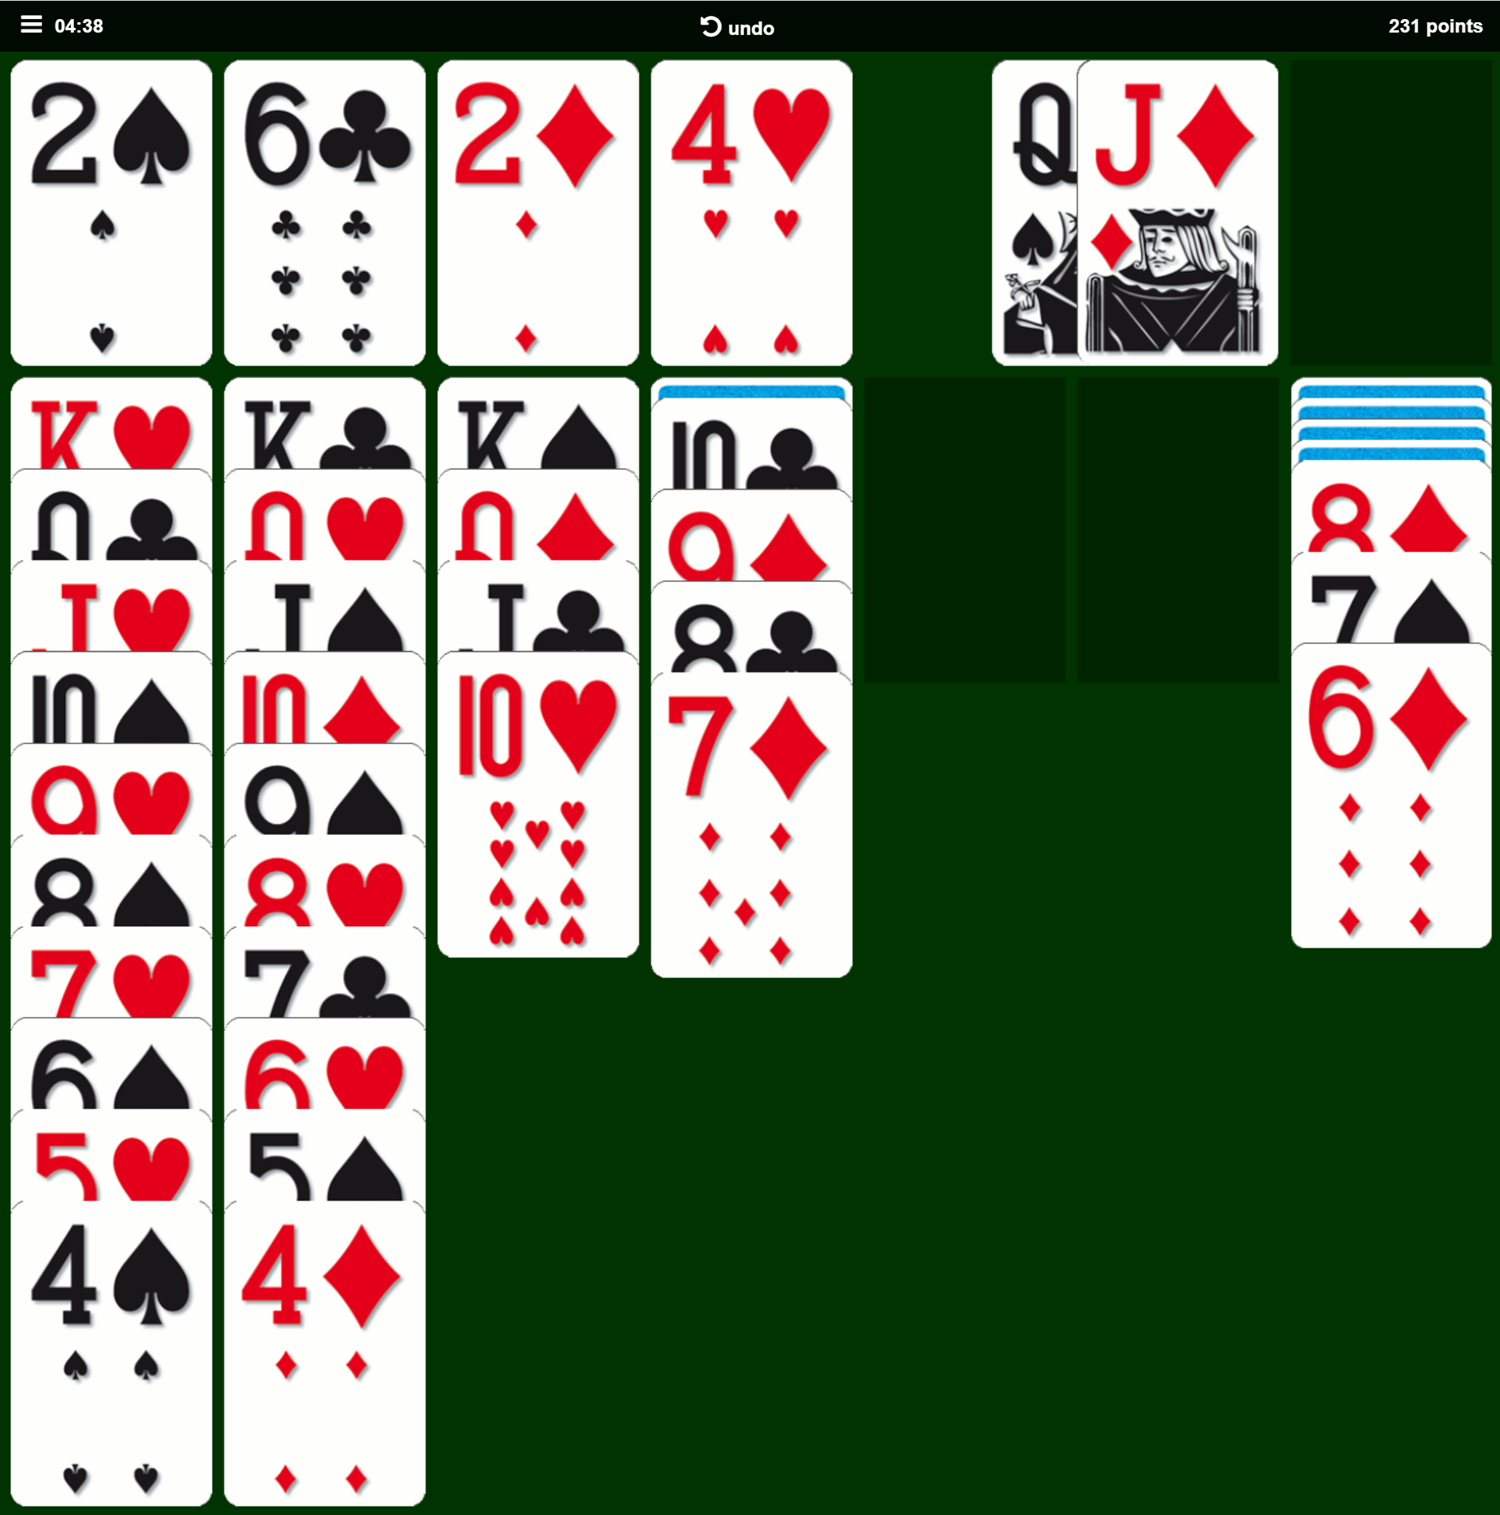 Classic Solitaire Card Game Play Screenshot.